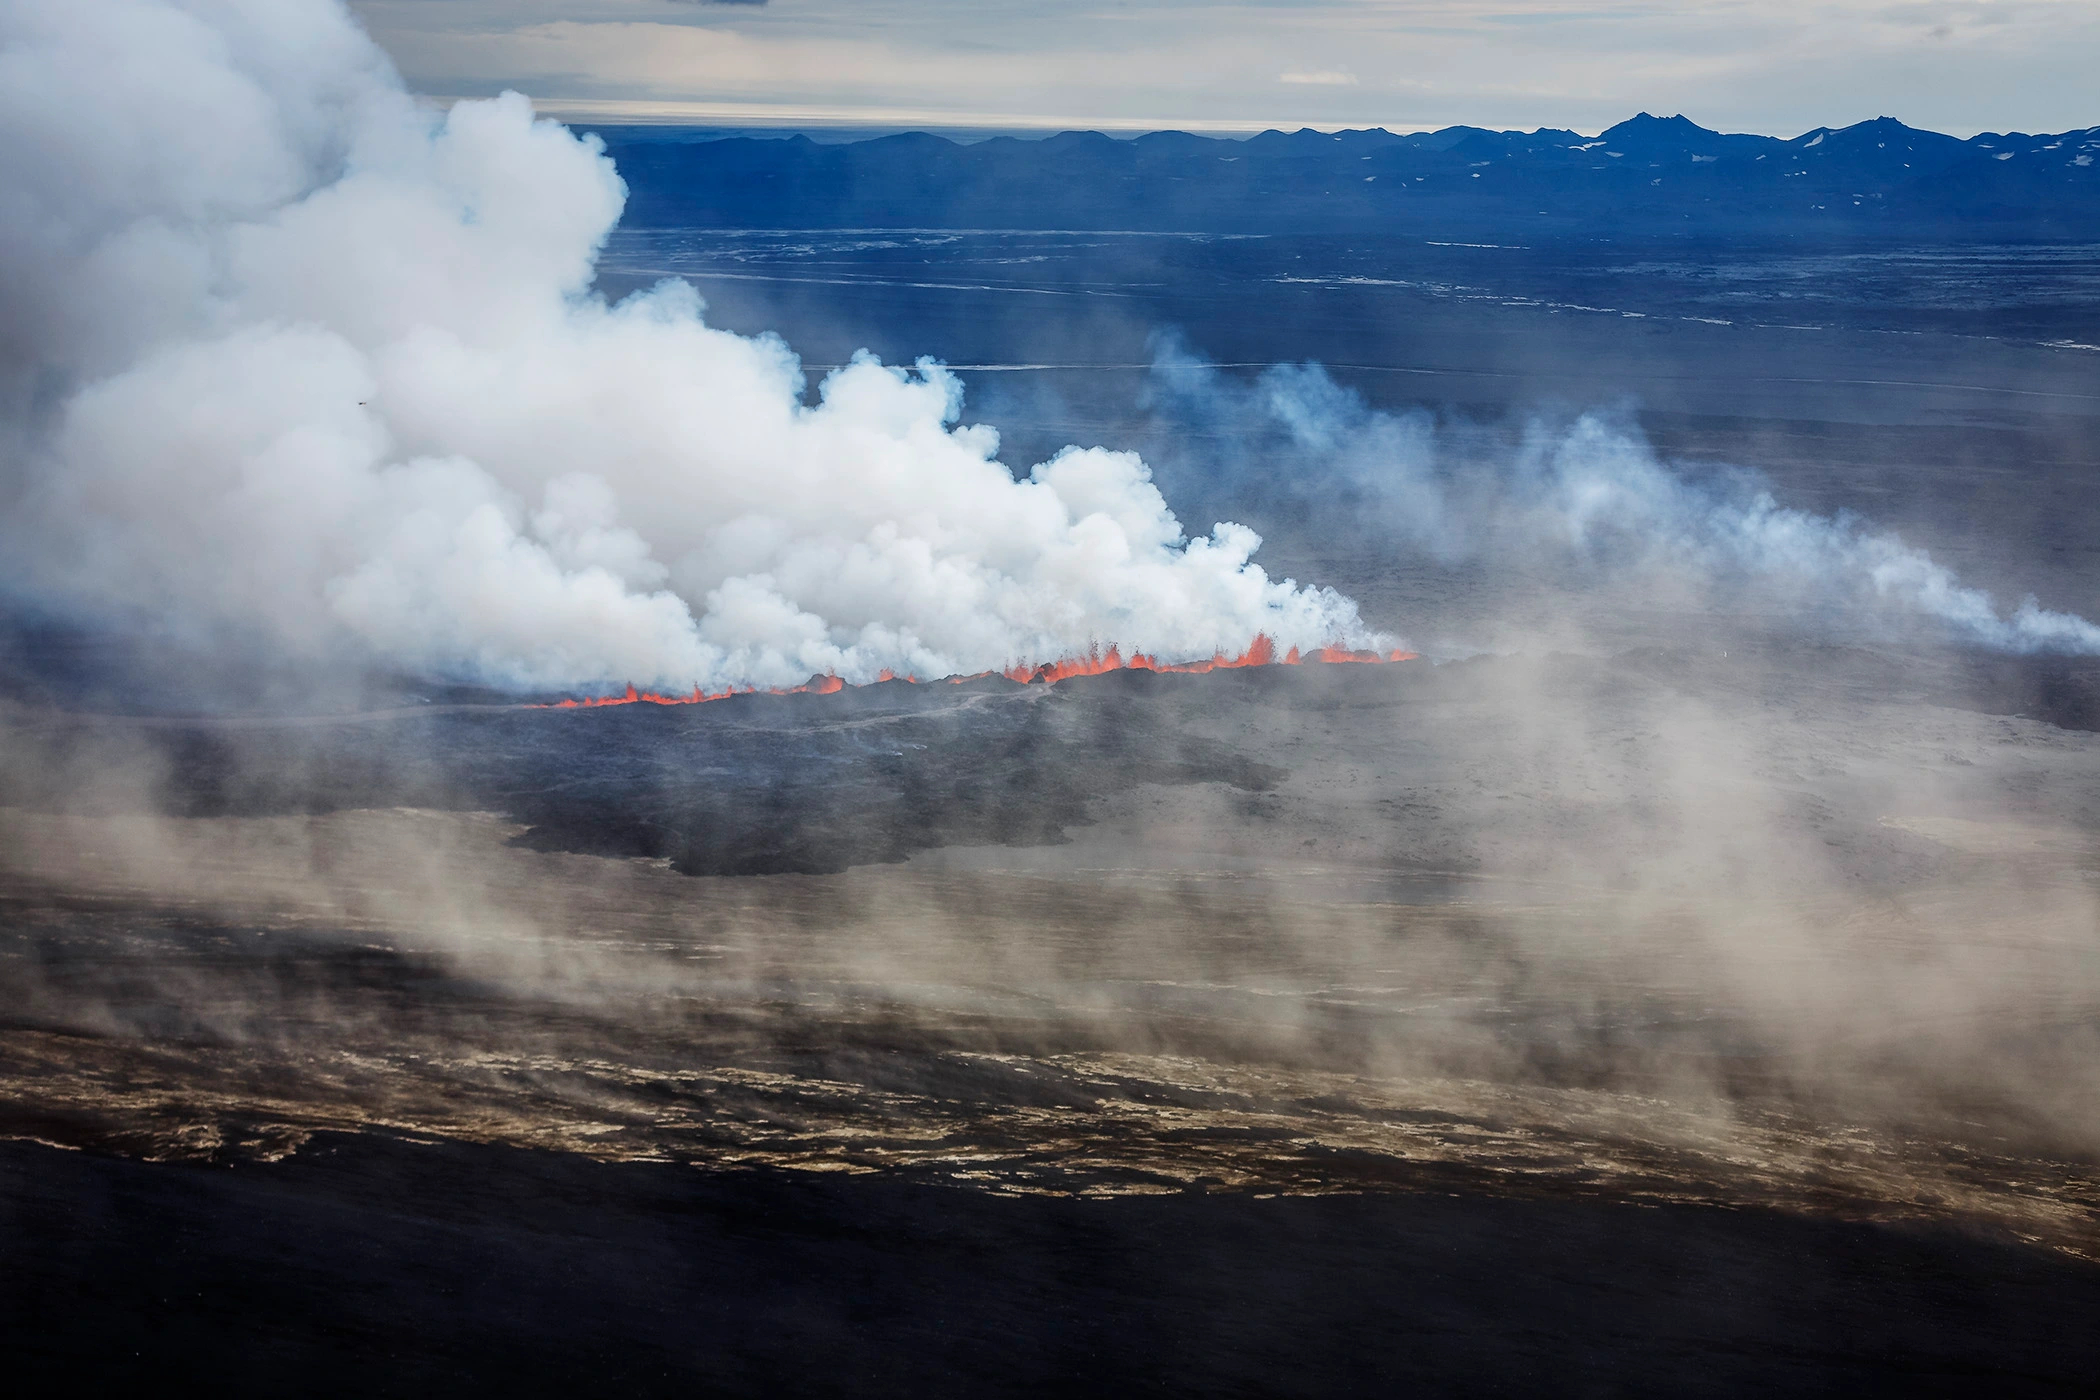 2100x1400 Photos: Incredible Close-Ups of a Volcanic Eruption in Iceland | Time